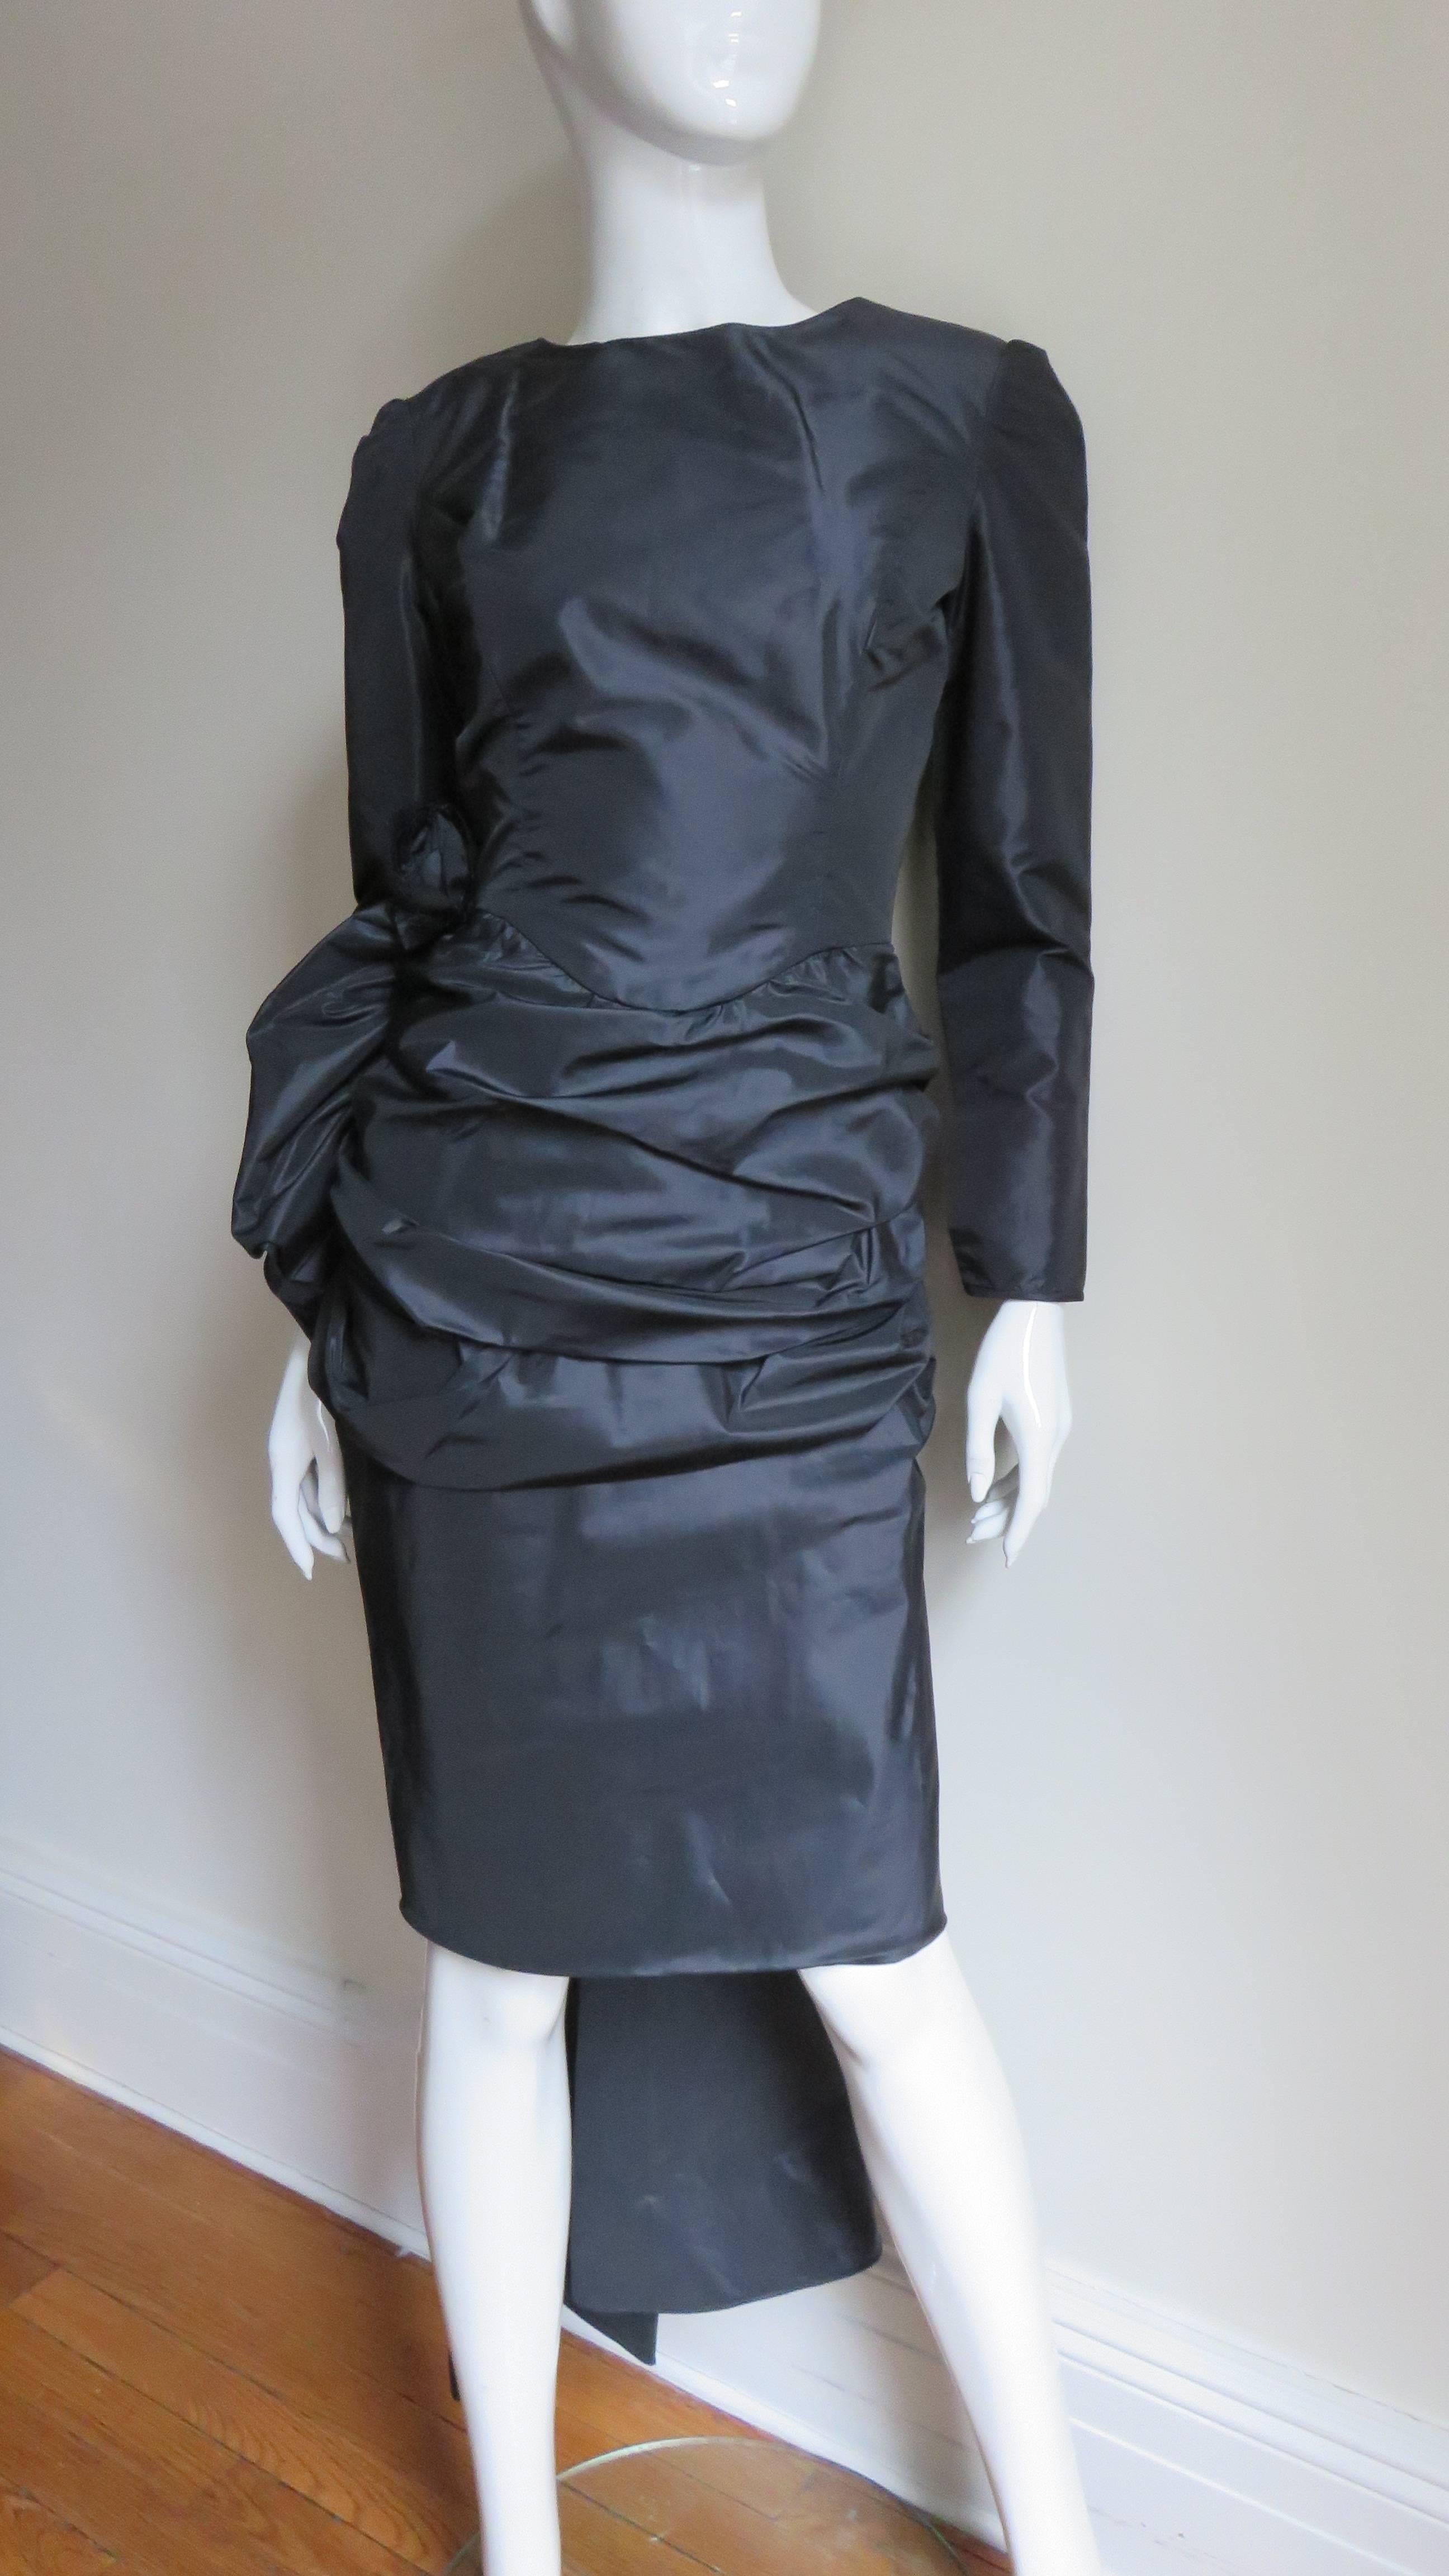 A fabulous black taffeta dress from Victor Costa.  It has a deep V back with an elaborate double drape layer decorated with black appliqued flowers of the same fabric below it and 2 panels emanating from it falling to the calf.  The front is simple